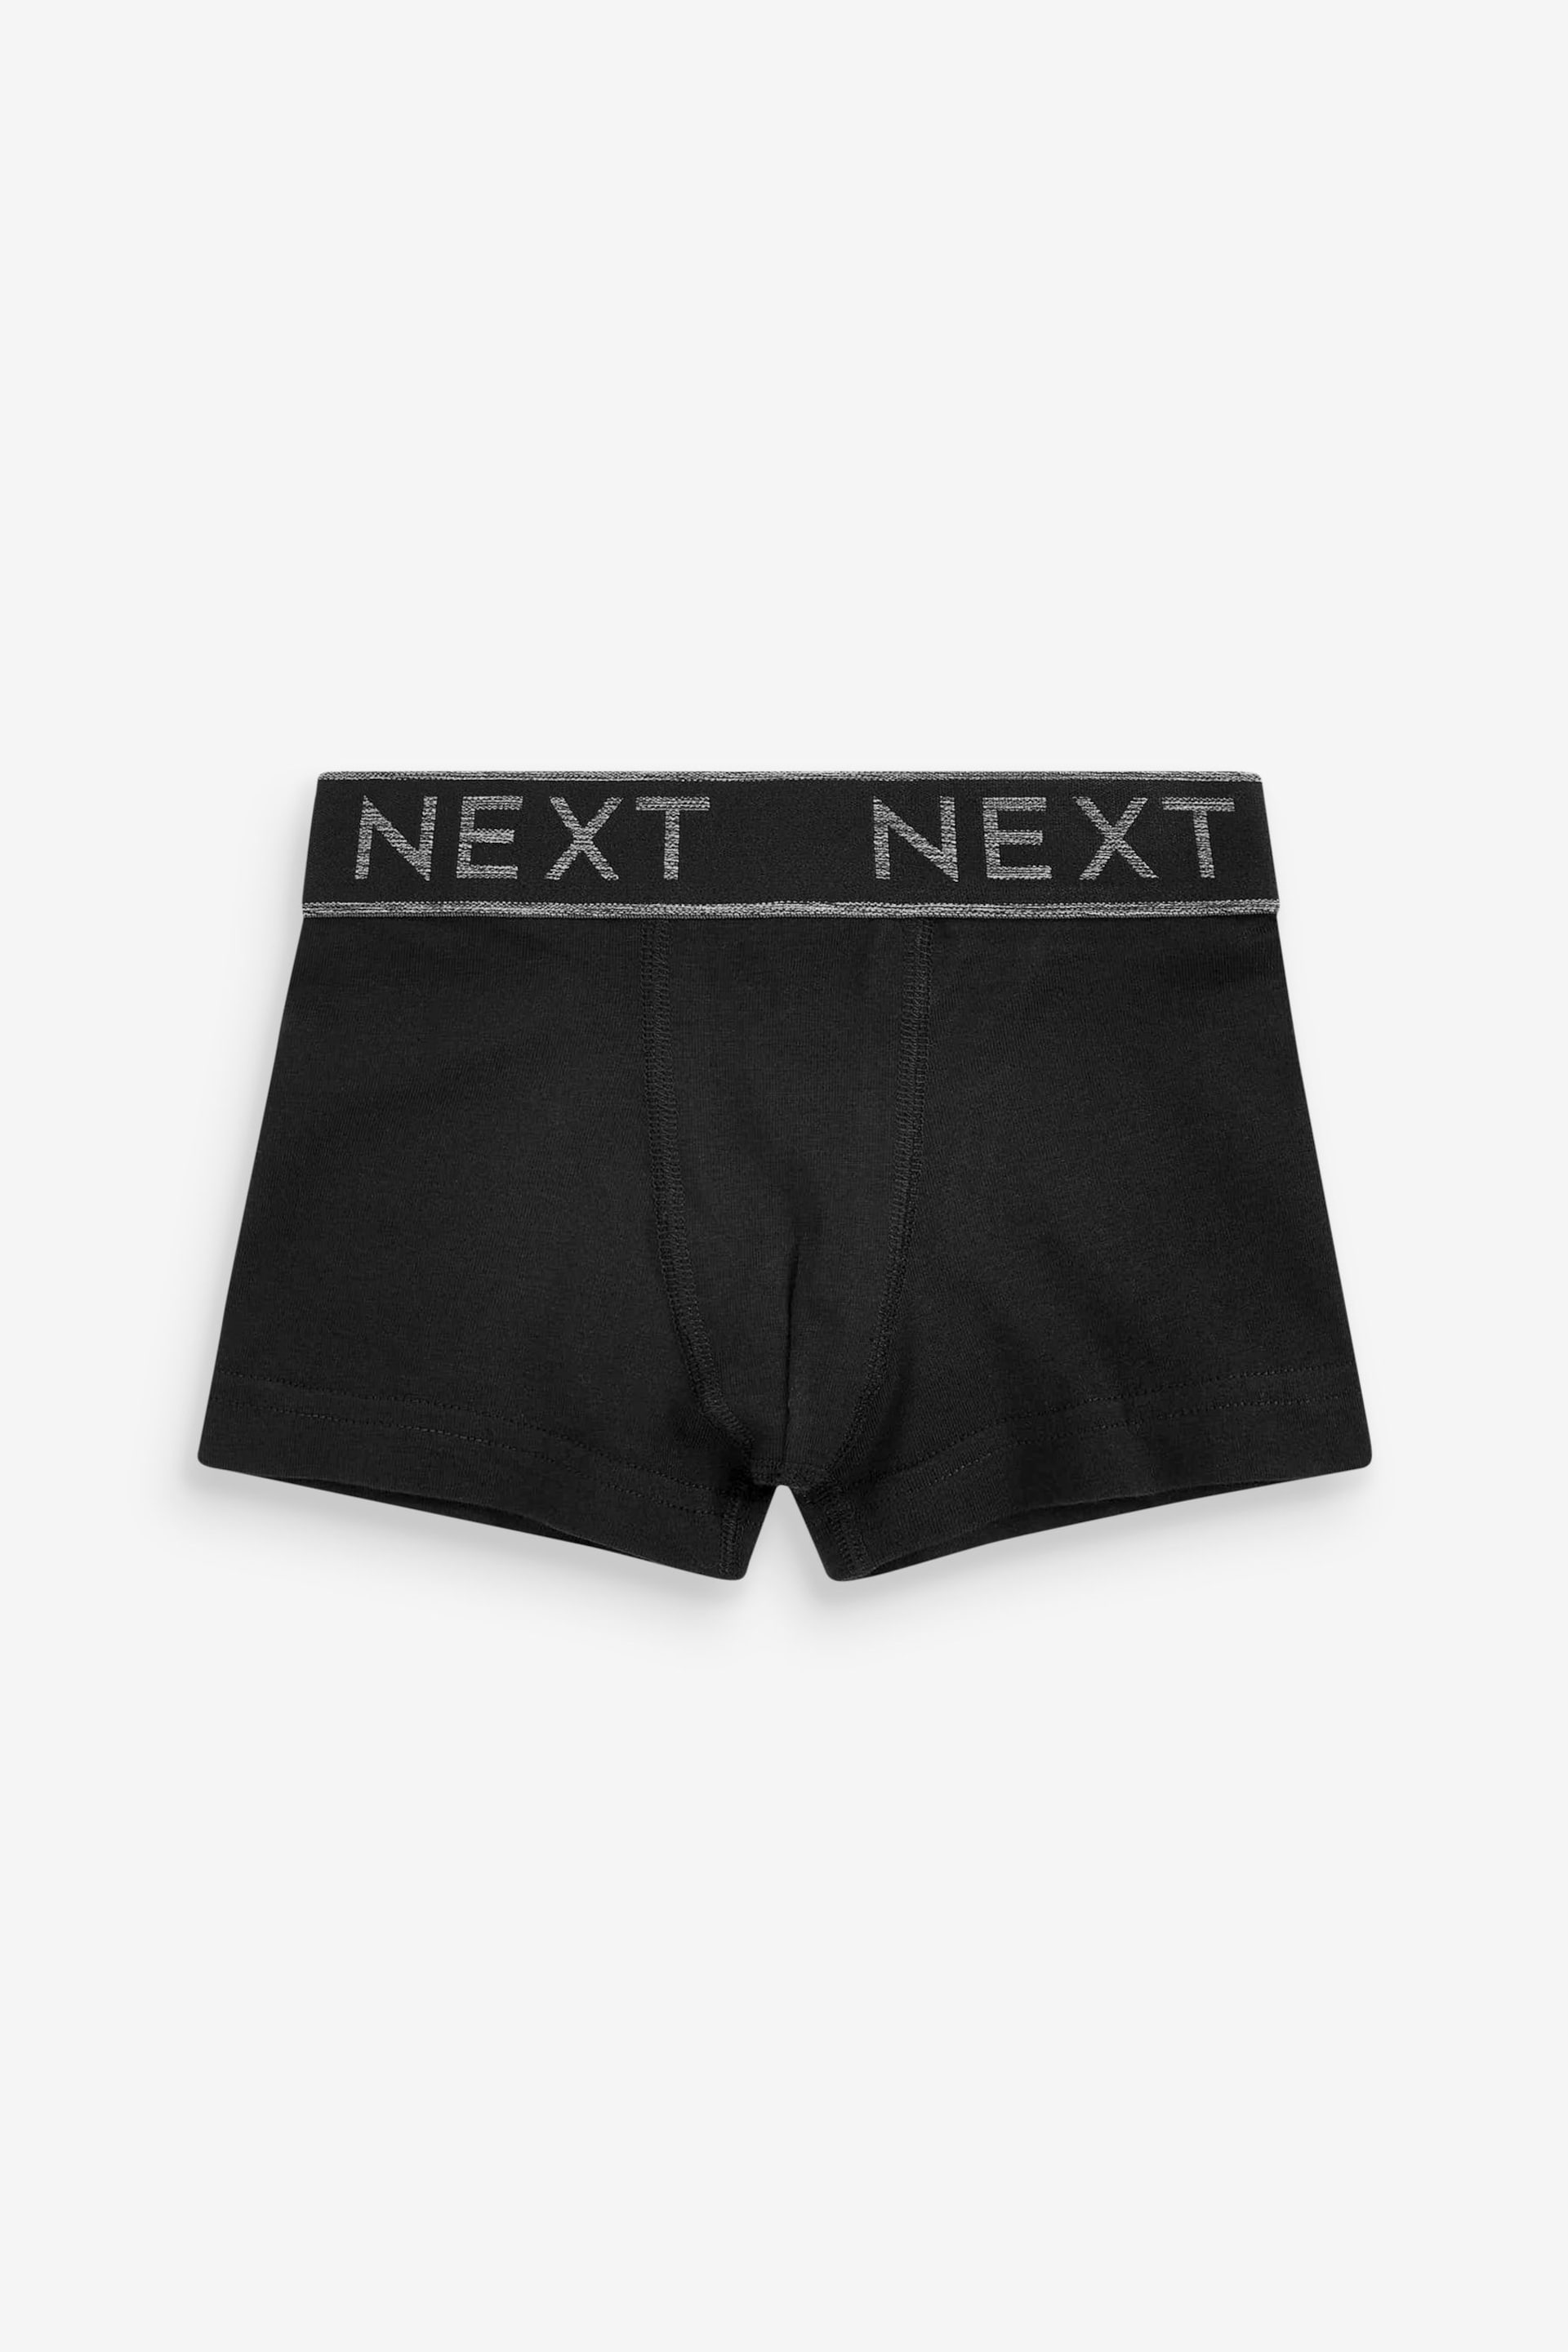 Black/Grey Waistband Trunks 10 Pack (1.5-16yrs) - Image 11 of 11